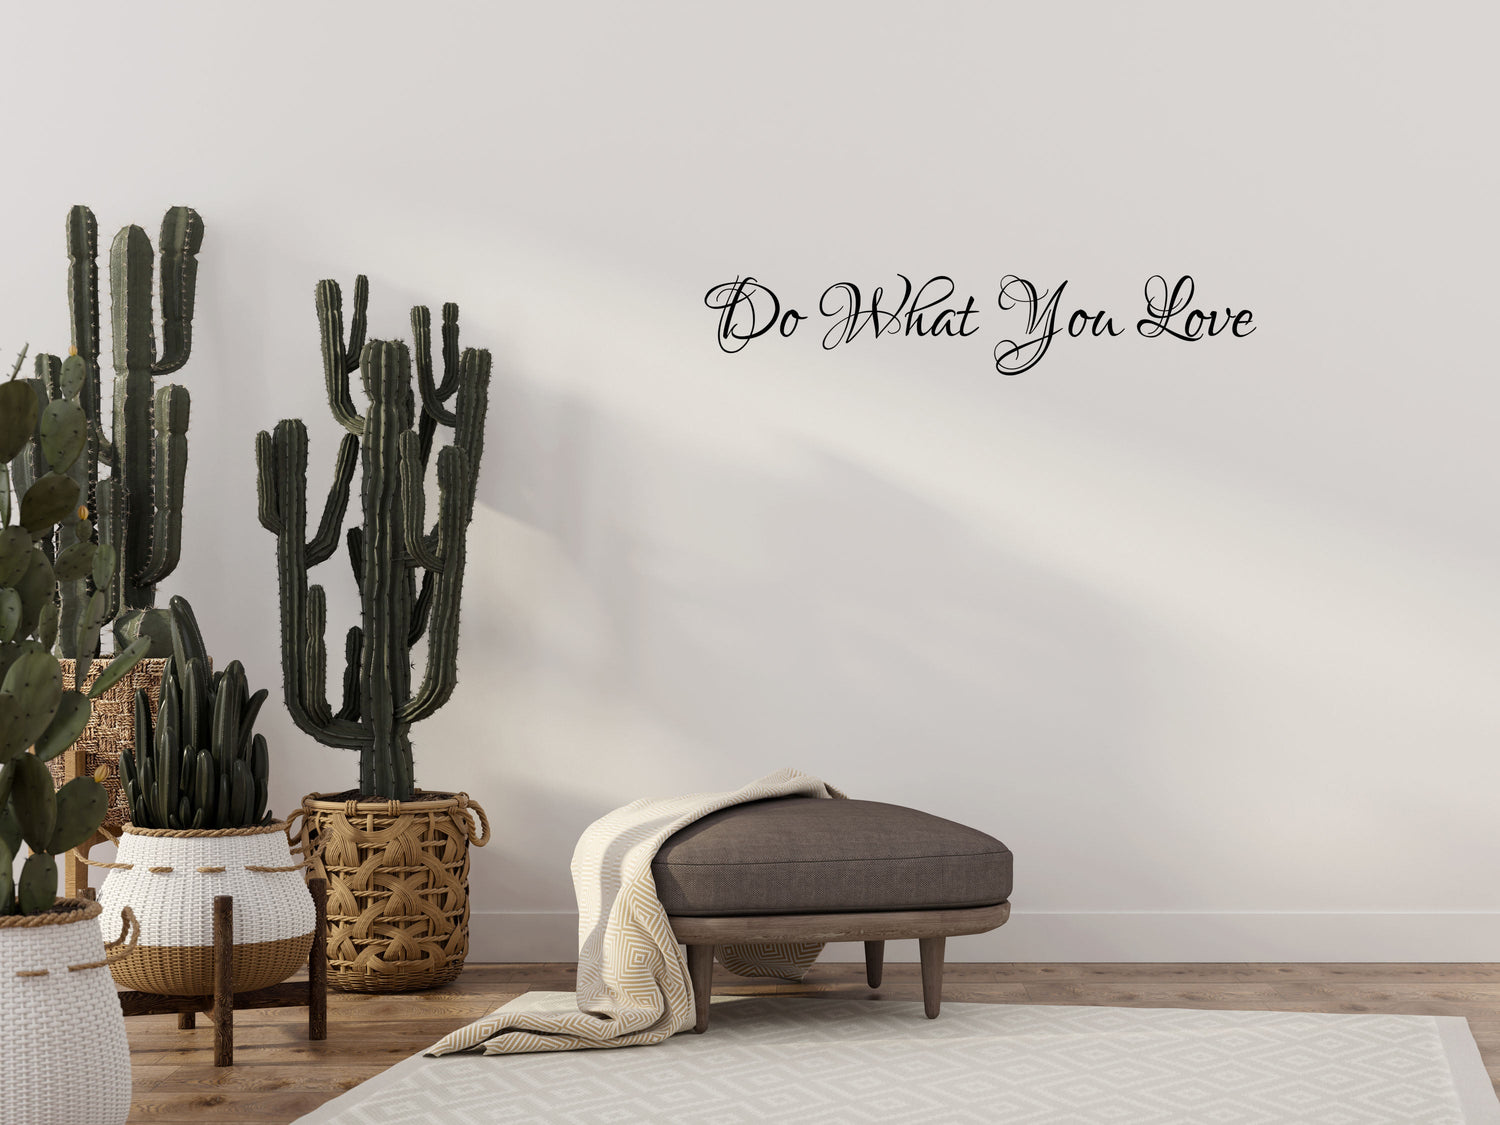 Bedroom Wall Decal I Love You Romantic Vinyl Lettering